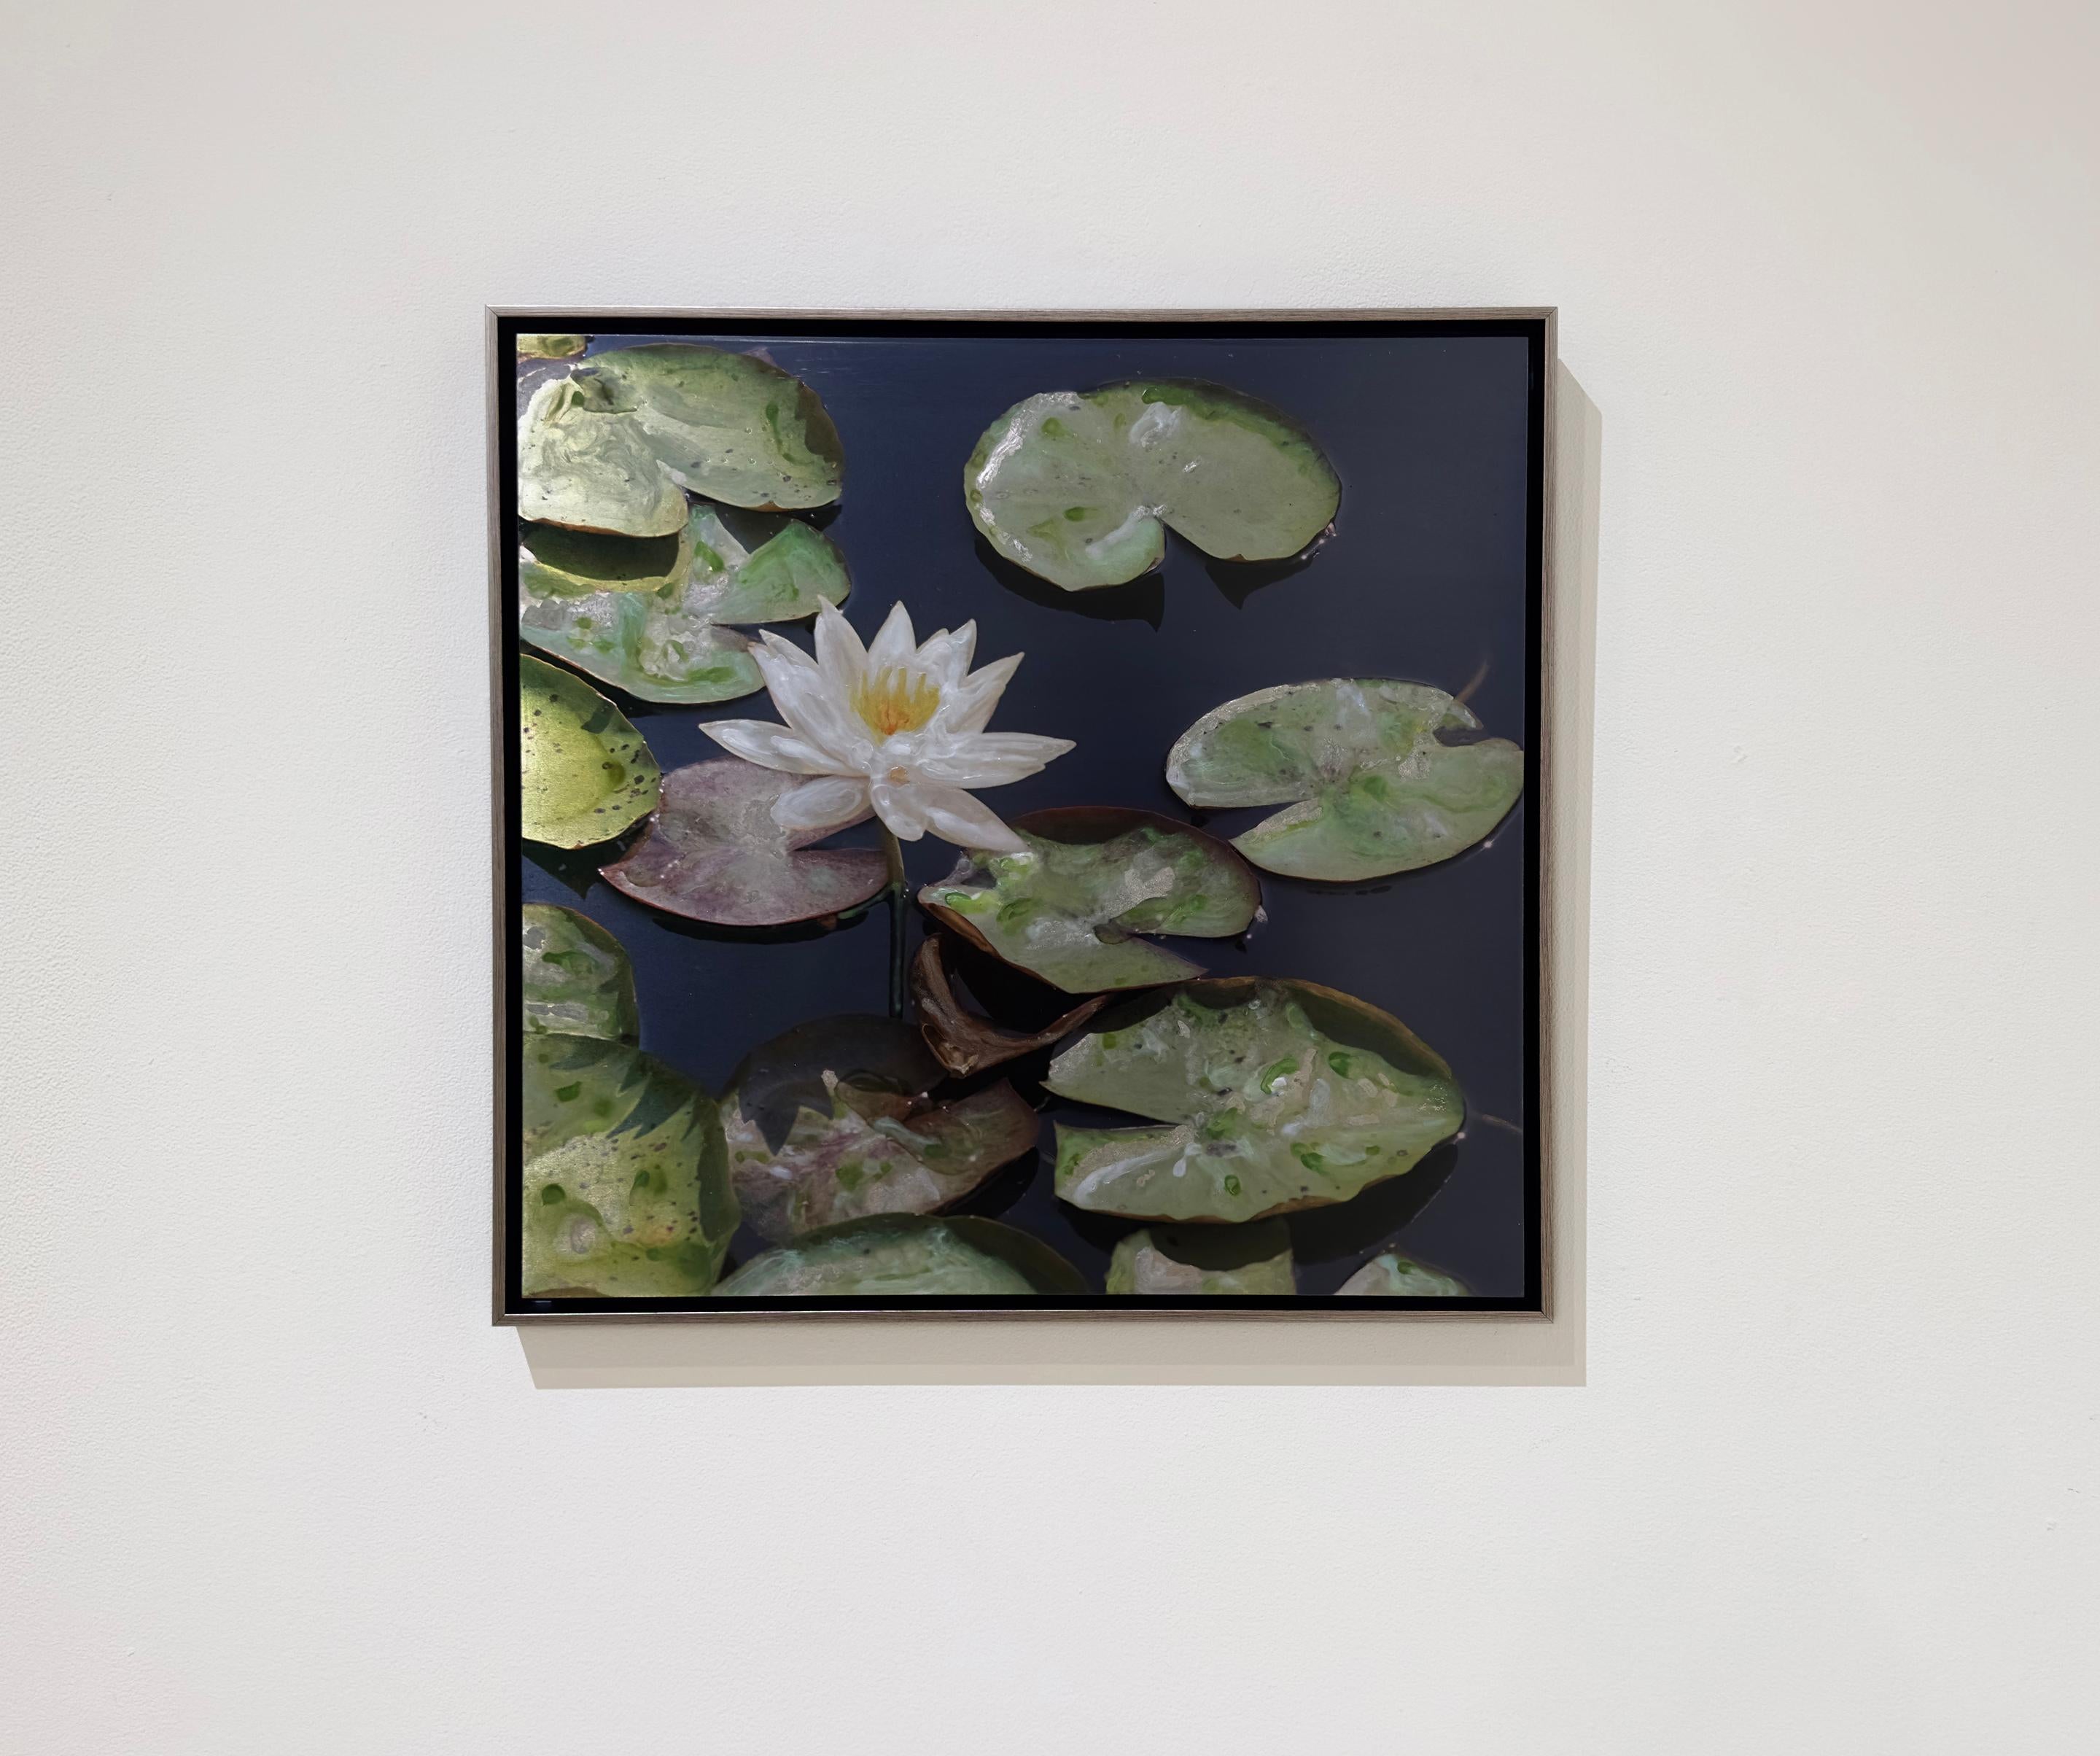 WHITE YAZI - Hyperrealism / Lily pads / Flower / Botanical - Contemporary Mixed Media Art by Susan Goldsmith